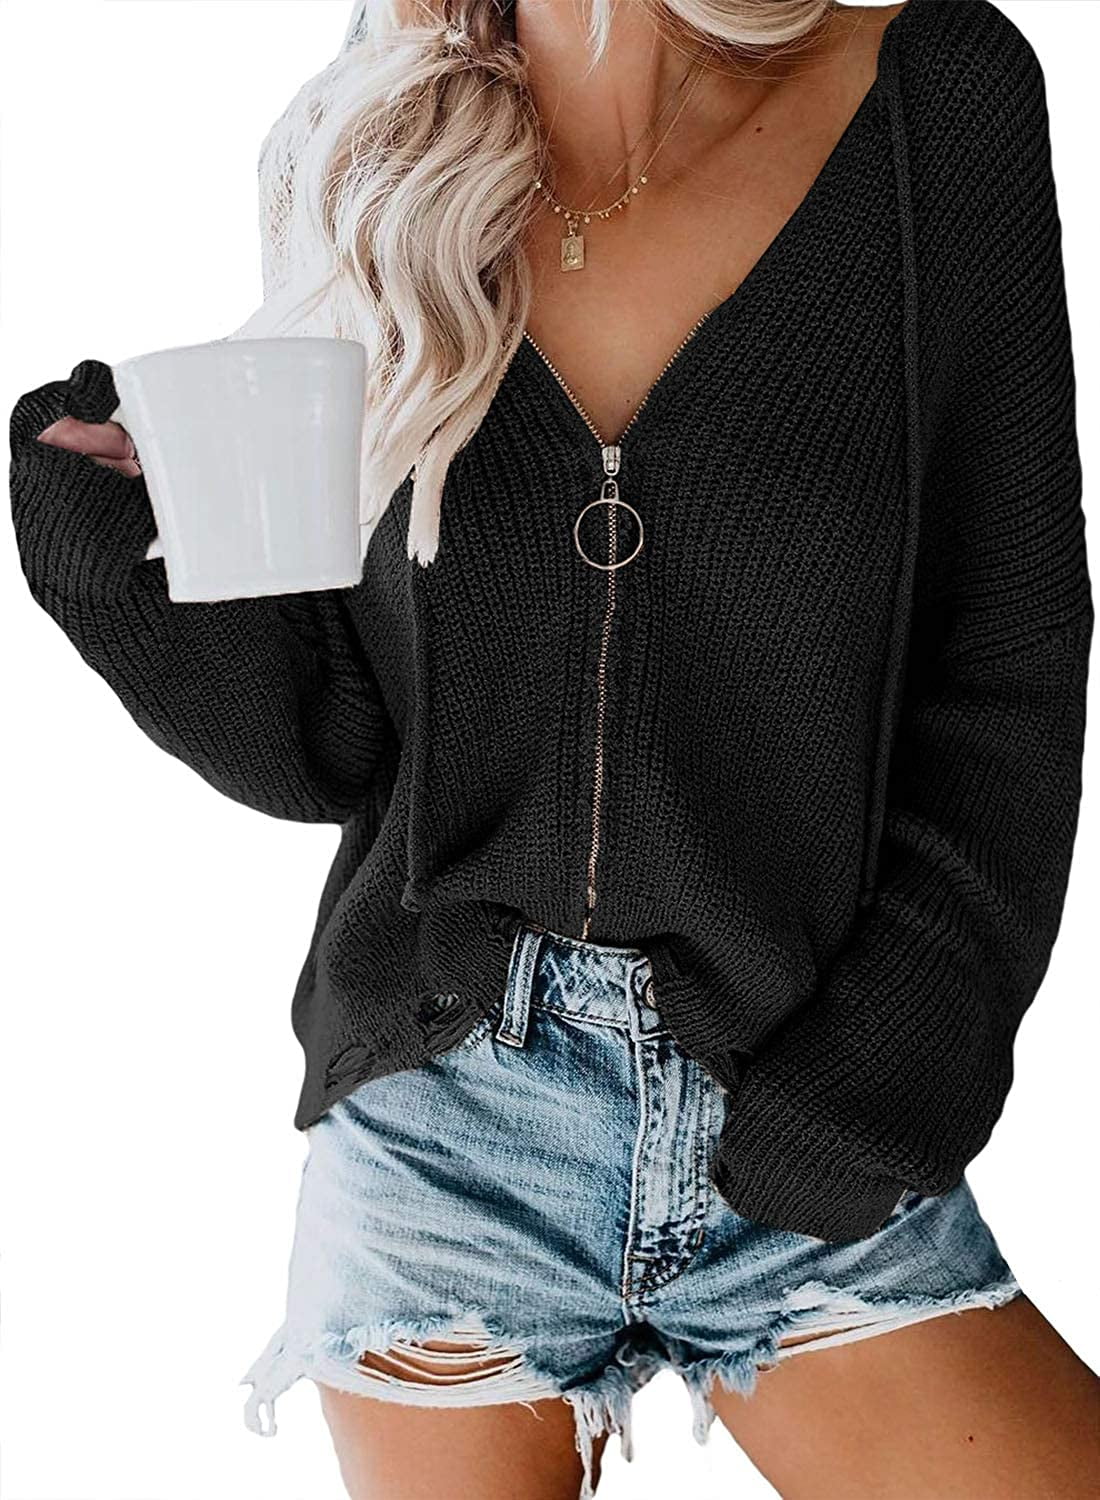 Sweatshirts for Women Zipper Front,Women V-Neck Long Sleeve Coat Knitted Pullover Loose Sweater Jumper Tops 